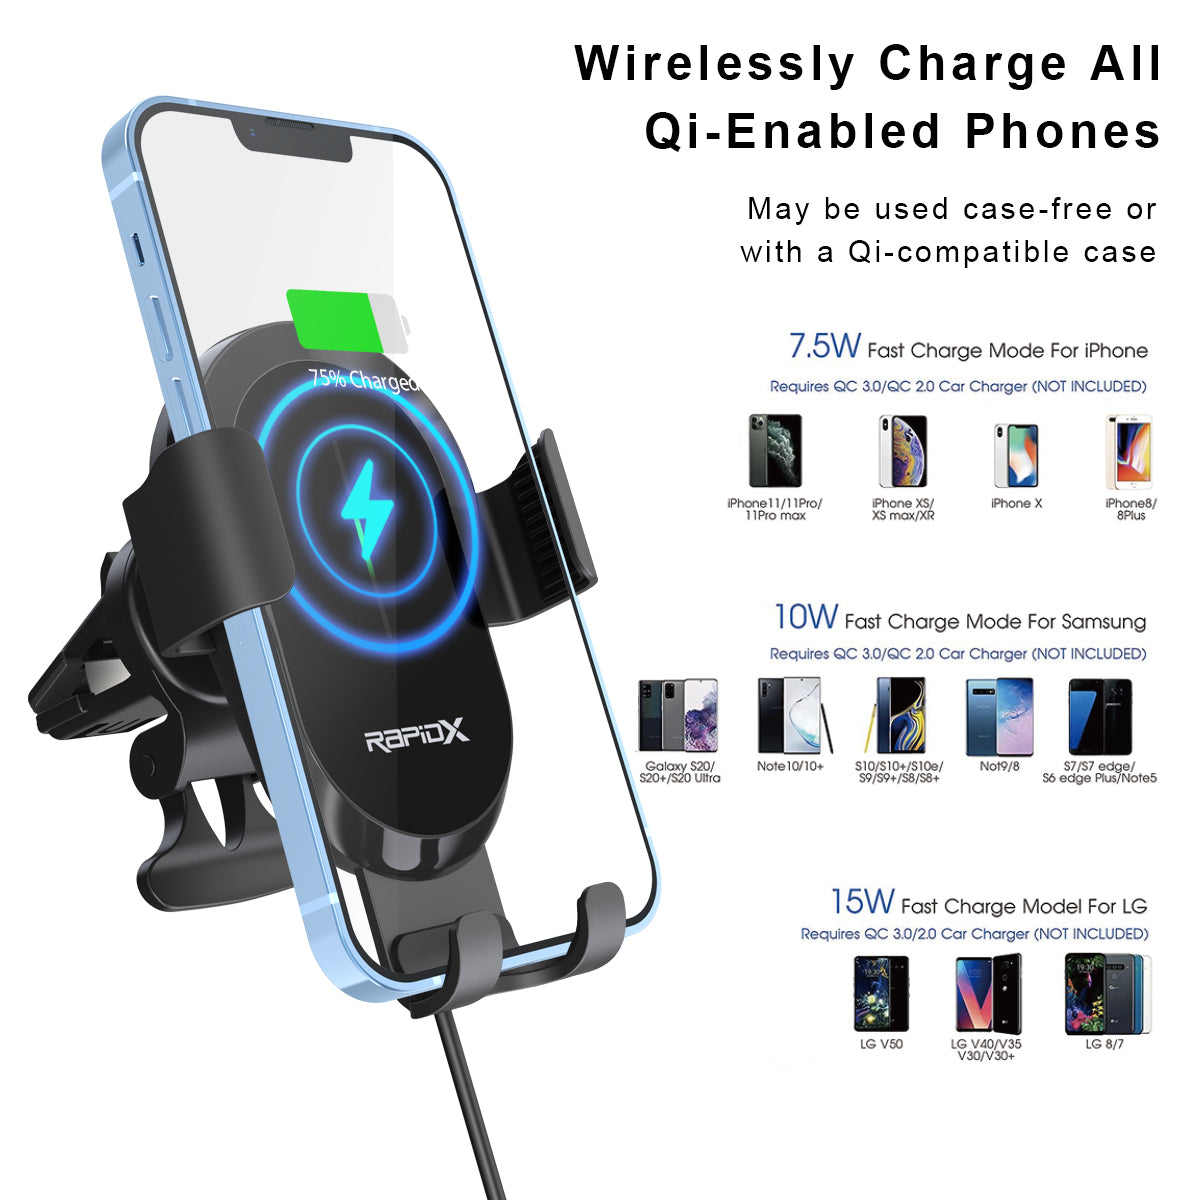 Dashio CW4 Car Vent Mount & Wireless Charger, up to 15W, Slide & Lock Cradle/Clamp, for All Smartphones (iPhone, Samsung, & Other Qi-Enabled Androids)